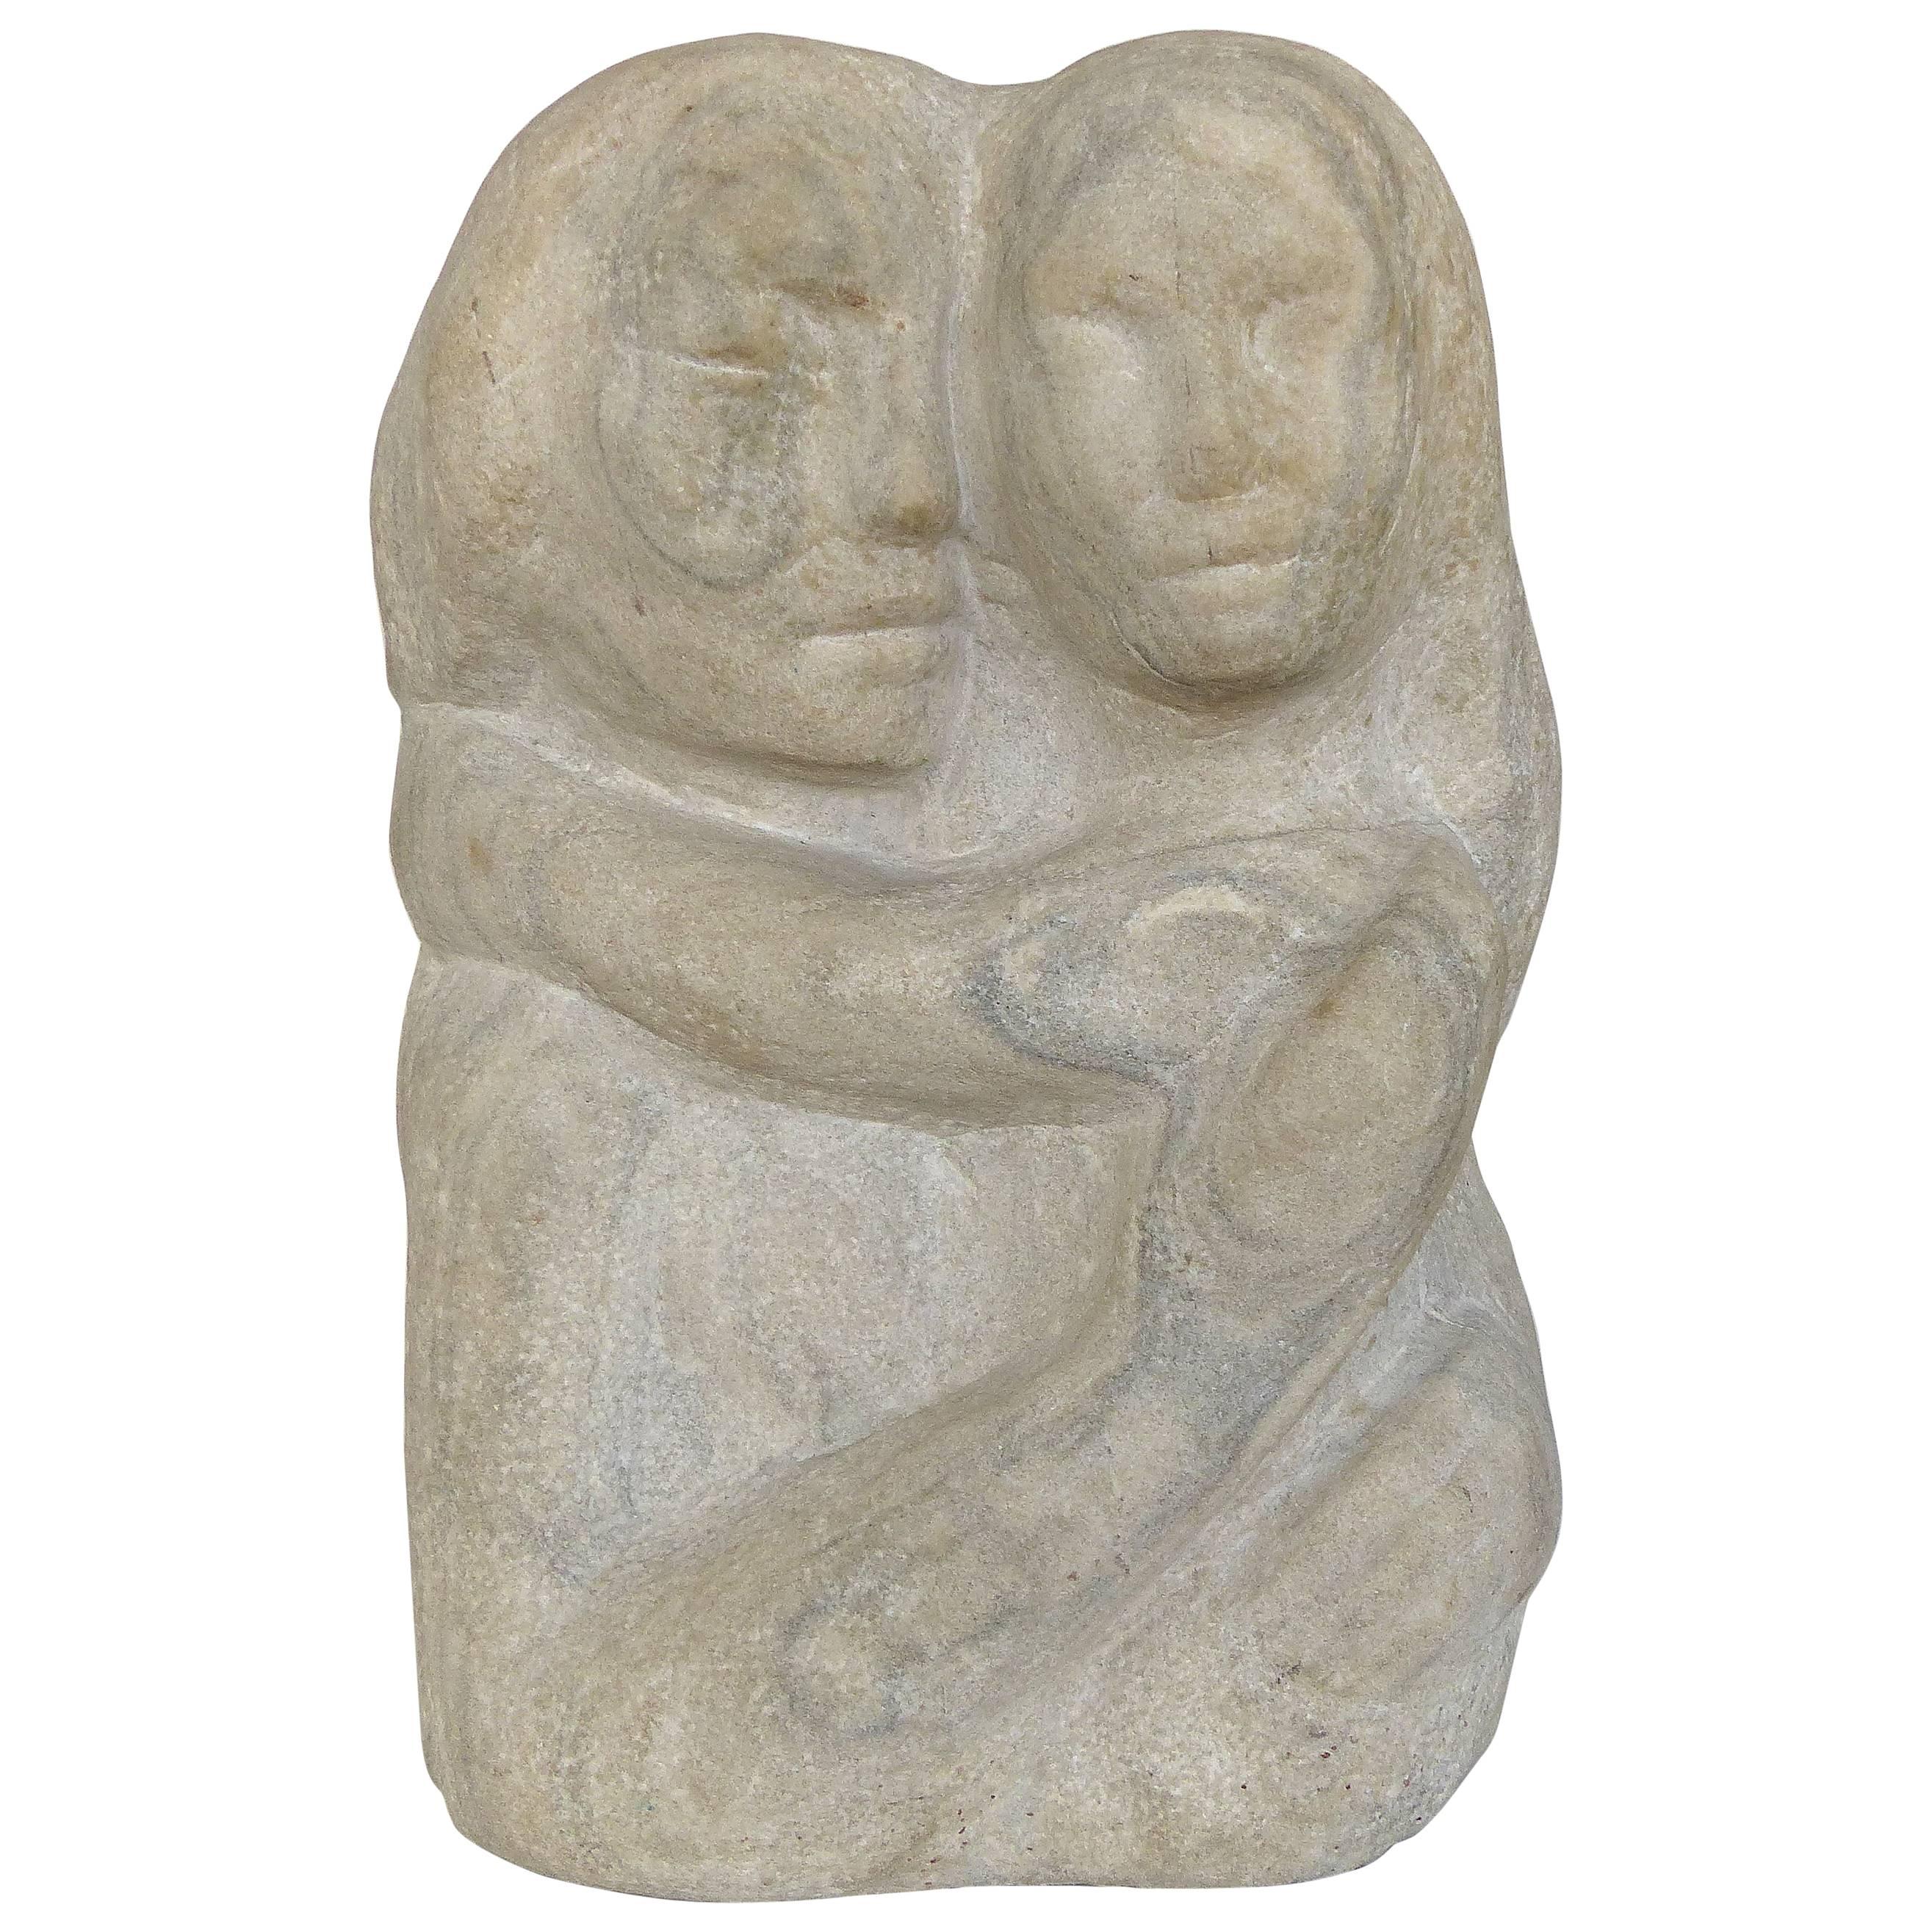 Midcentury Figurative Carved Limestone Sculpture by Florence Krieger, 1919-2011